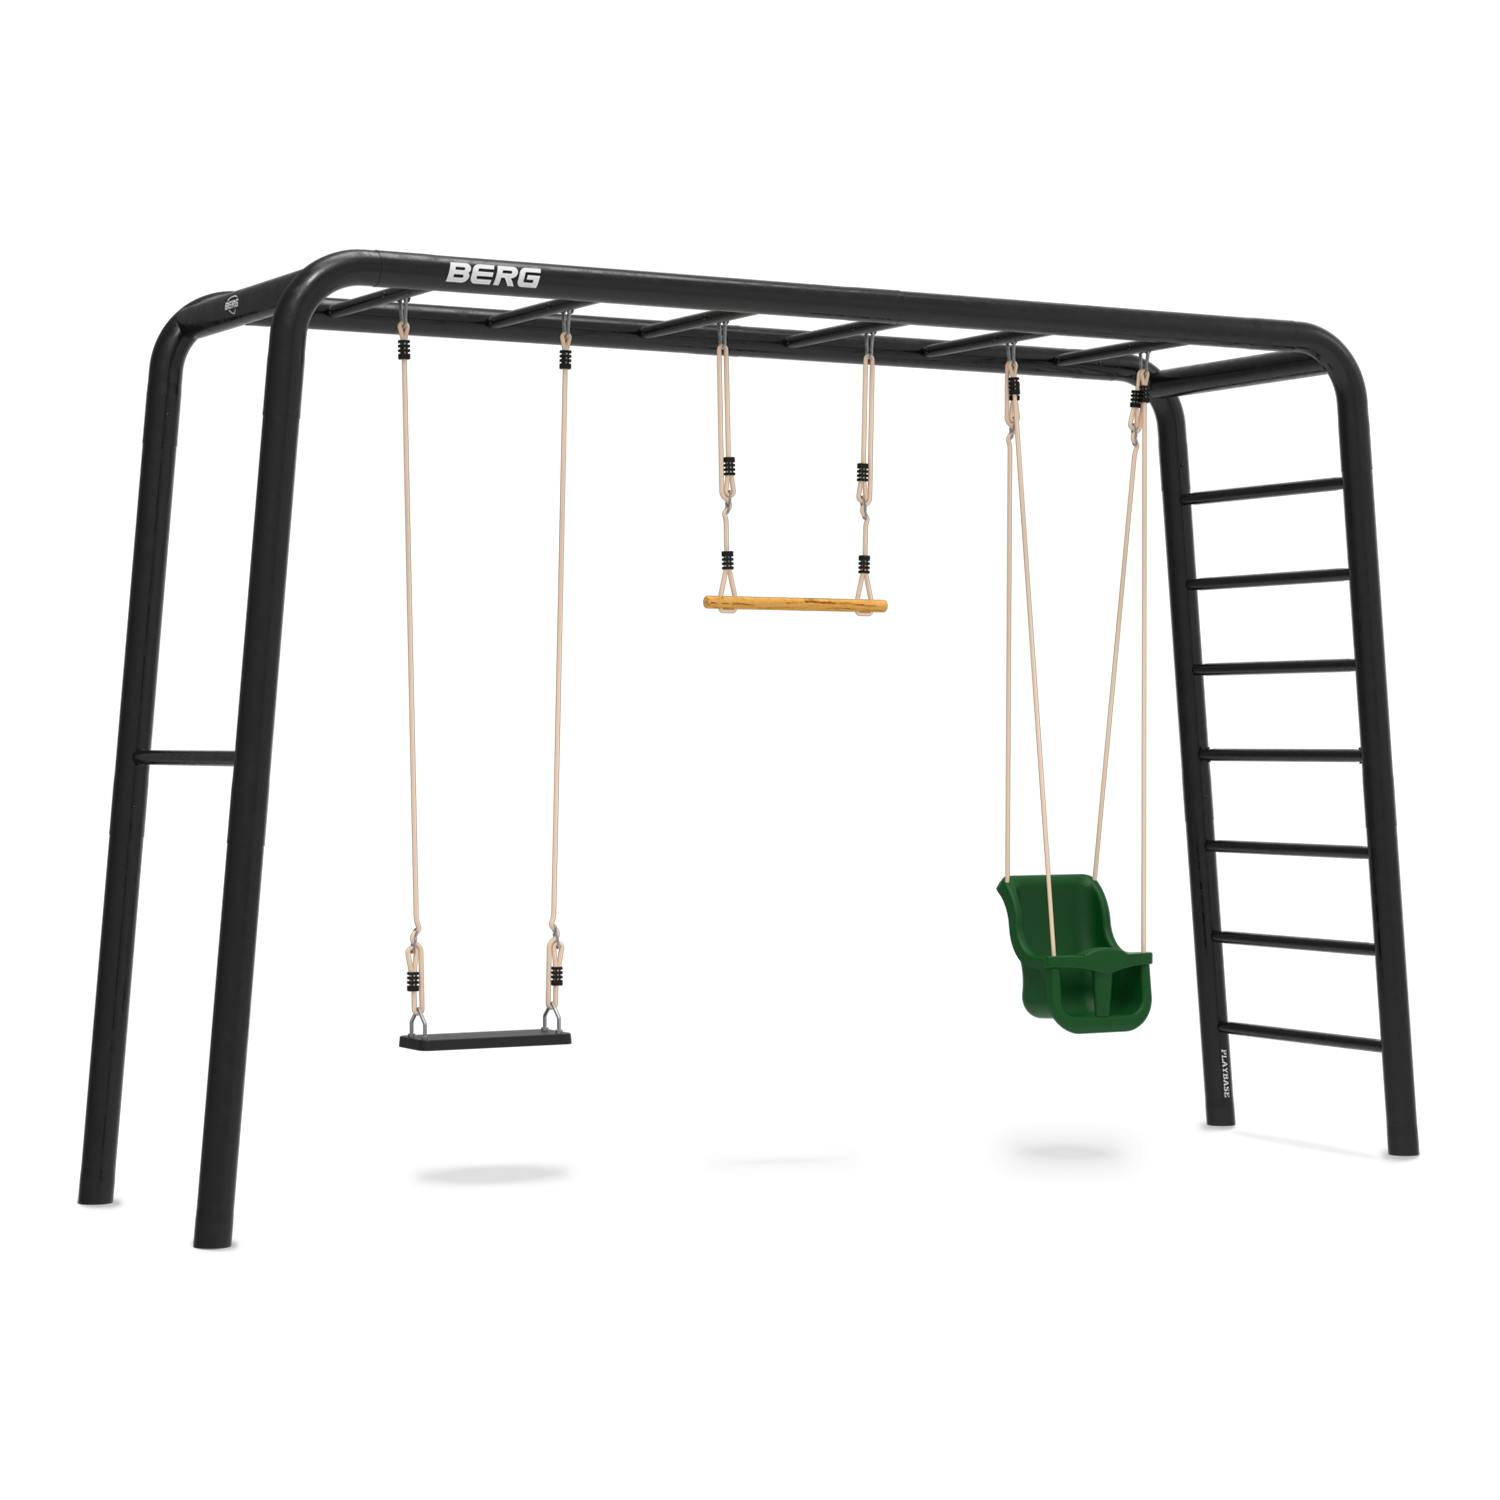 BERG Playbase Large TL Baby+Rubber Seat+Trapeze